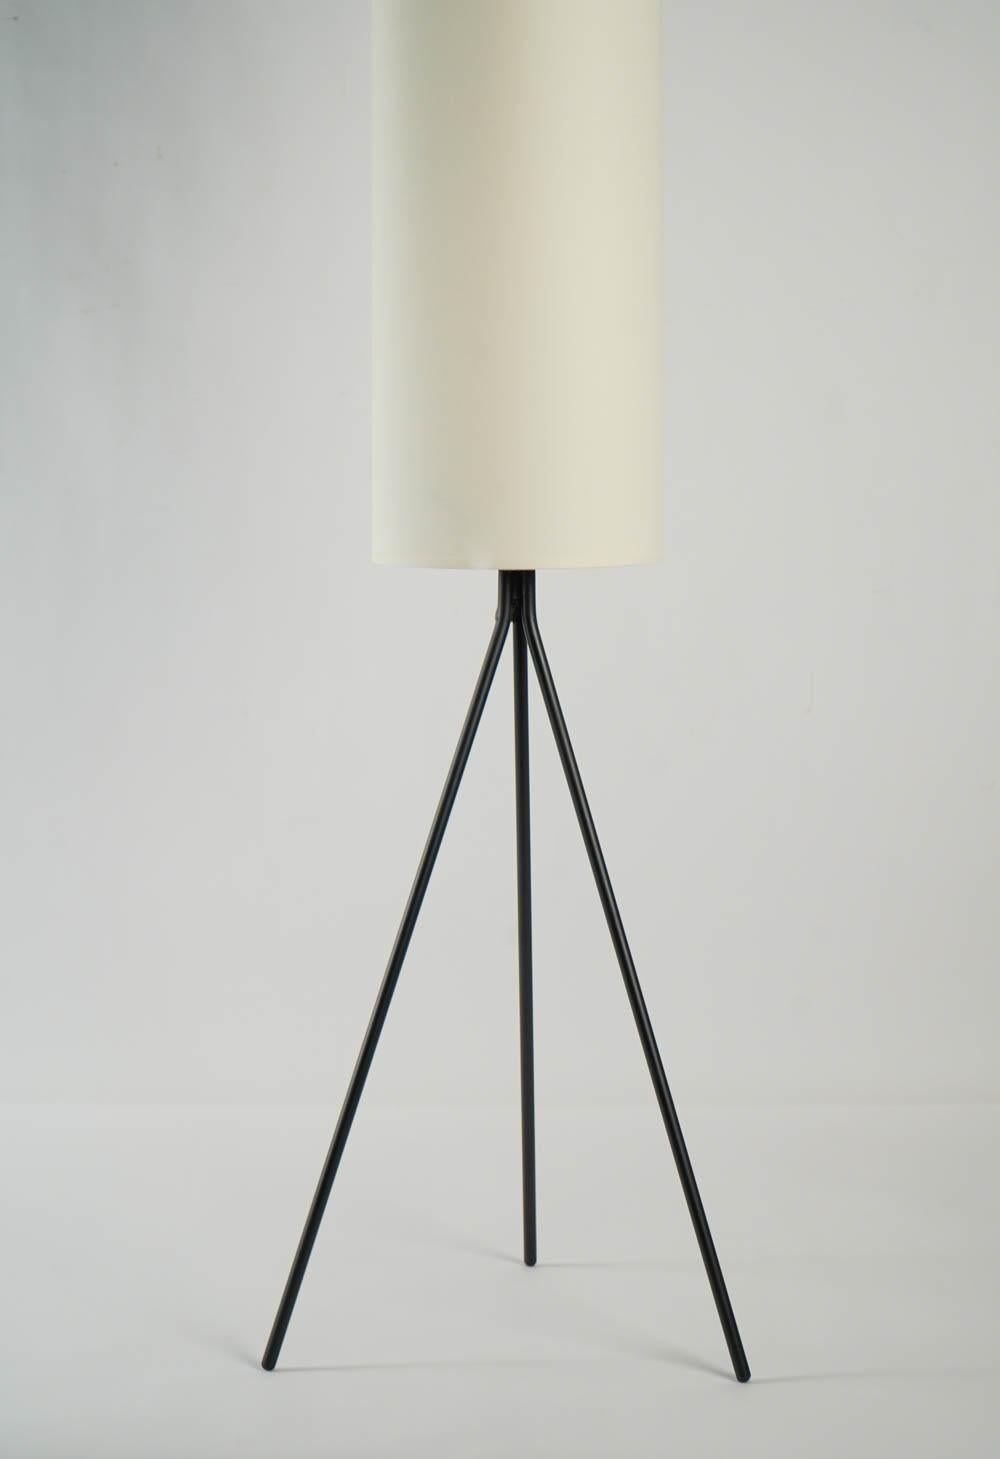 Tripod floor lamp made of black lacquered metal, handmade cylindrical shade of off-white cotton. A clever handle made of same material as the feet, curve shaped.
1 bulb.

Lampadaire Maison Lunel, 1950 
Piétement tripode en fer forgé noir se